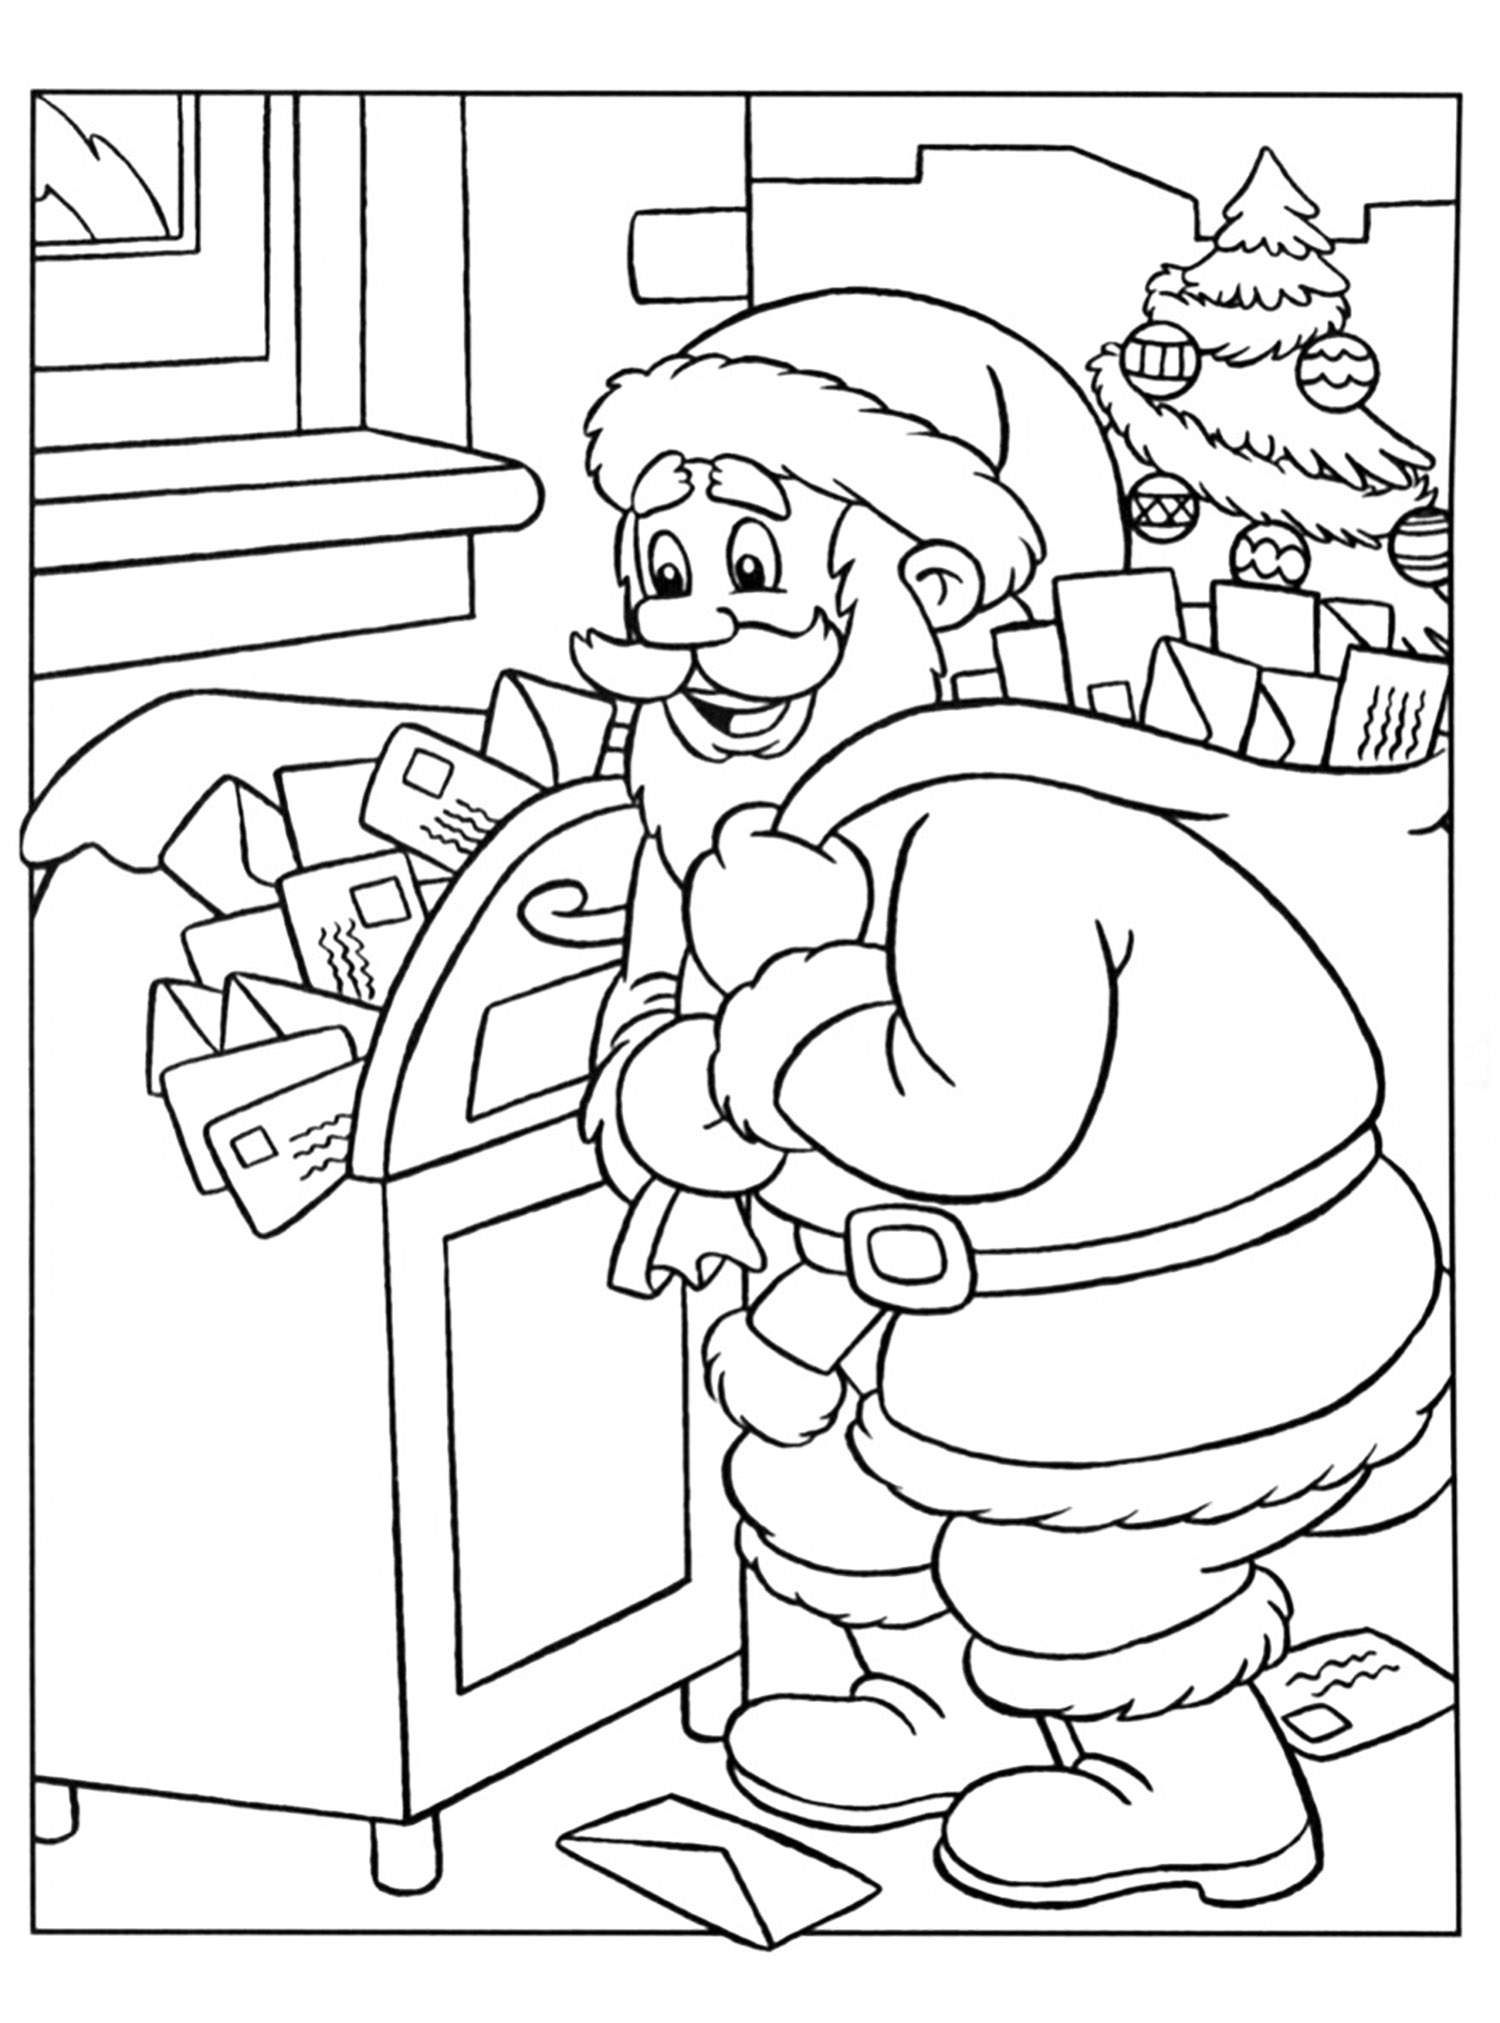 155 Unicorn Letter To Santa Coloring Page for Kids